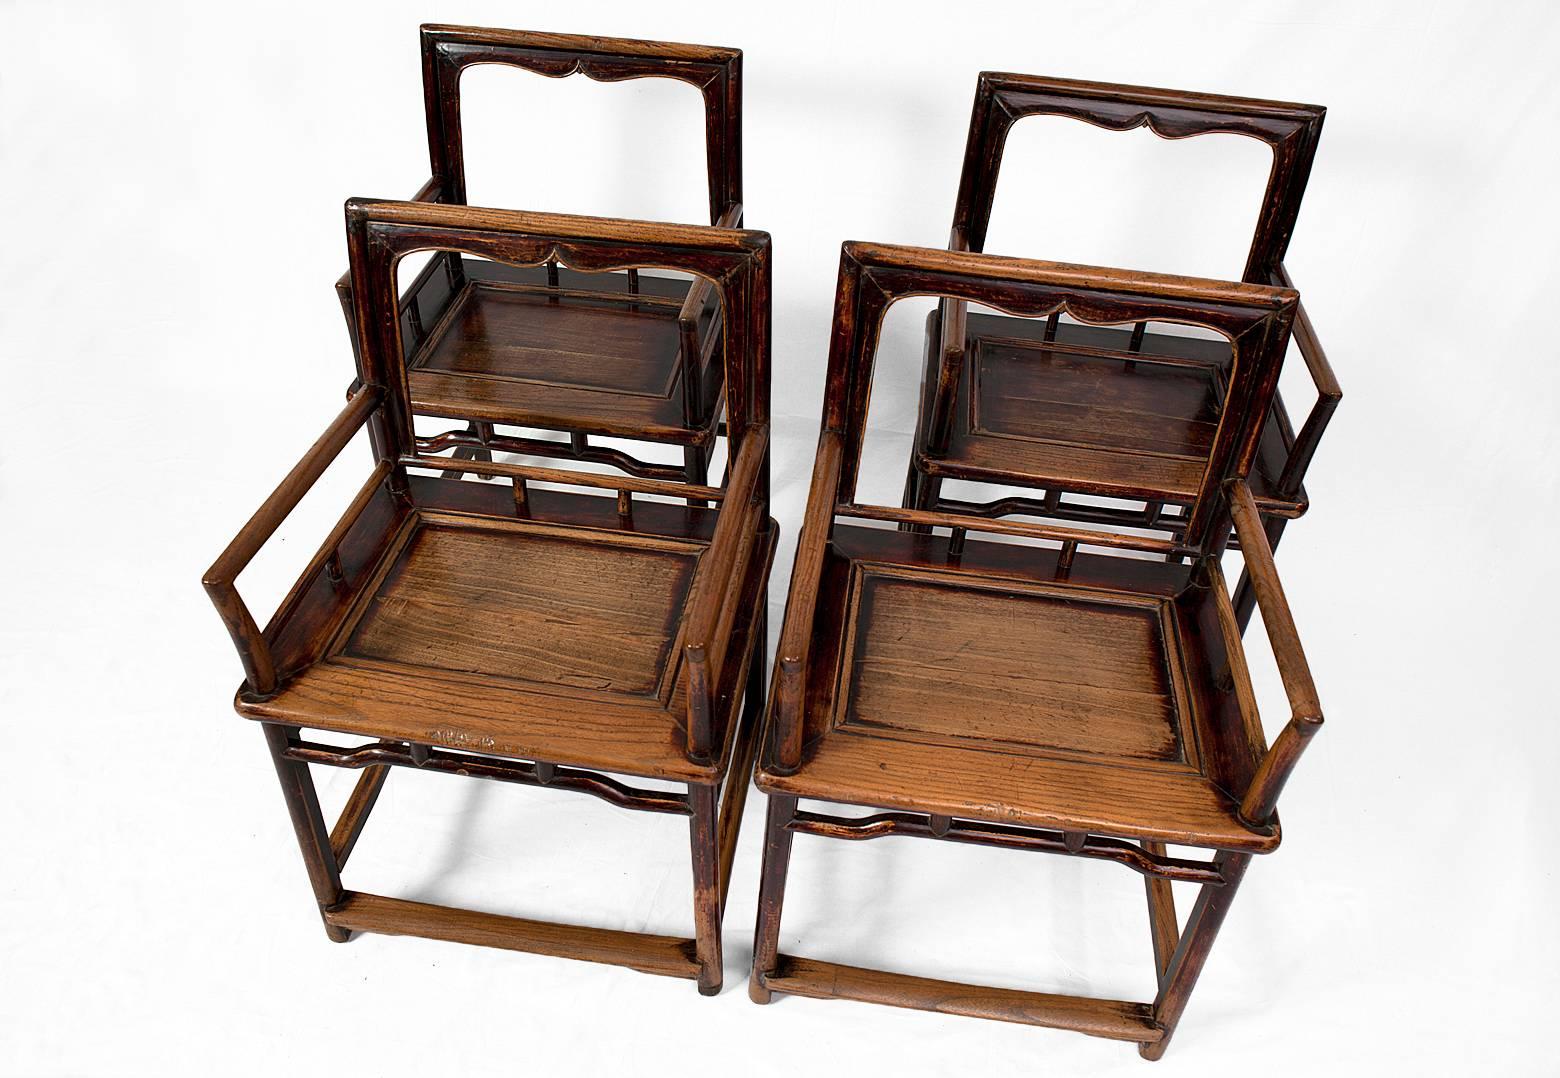 Provenance: Formerly in the collection of Ma Weidu
This set of four 17th century Shanxi province chairs was made in the rose back style (meiguiyi). 
Rose chairs were one of the most popular types of chairs during the Ming and early Qing dynasties